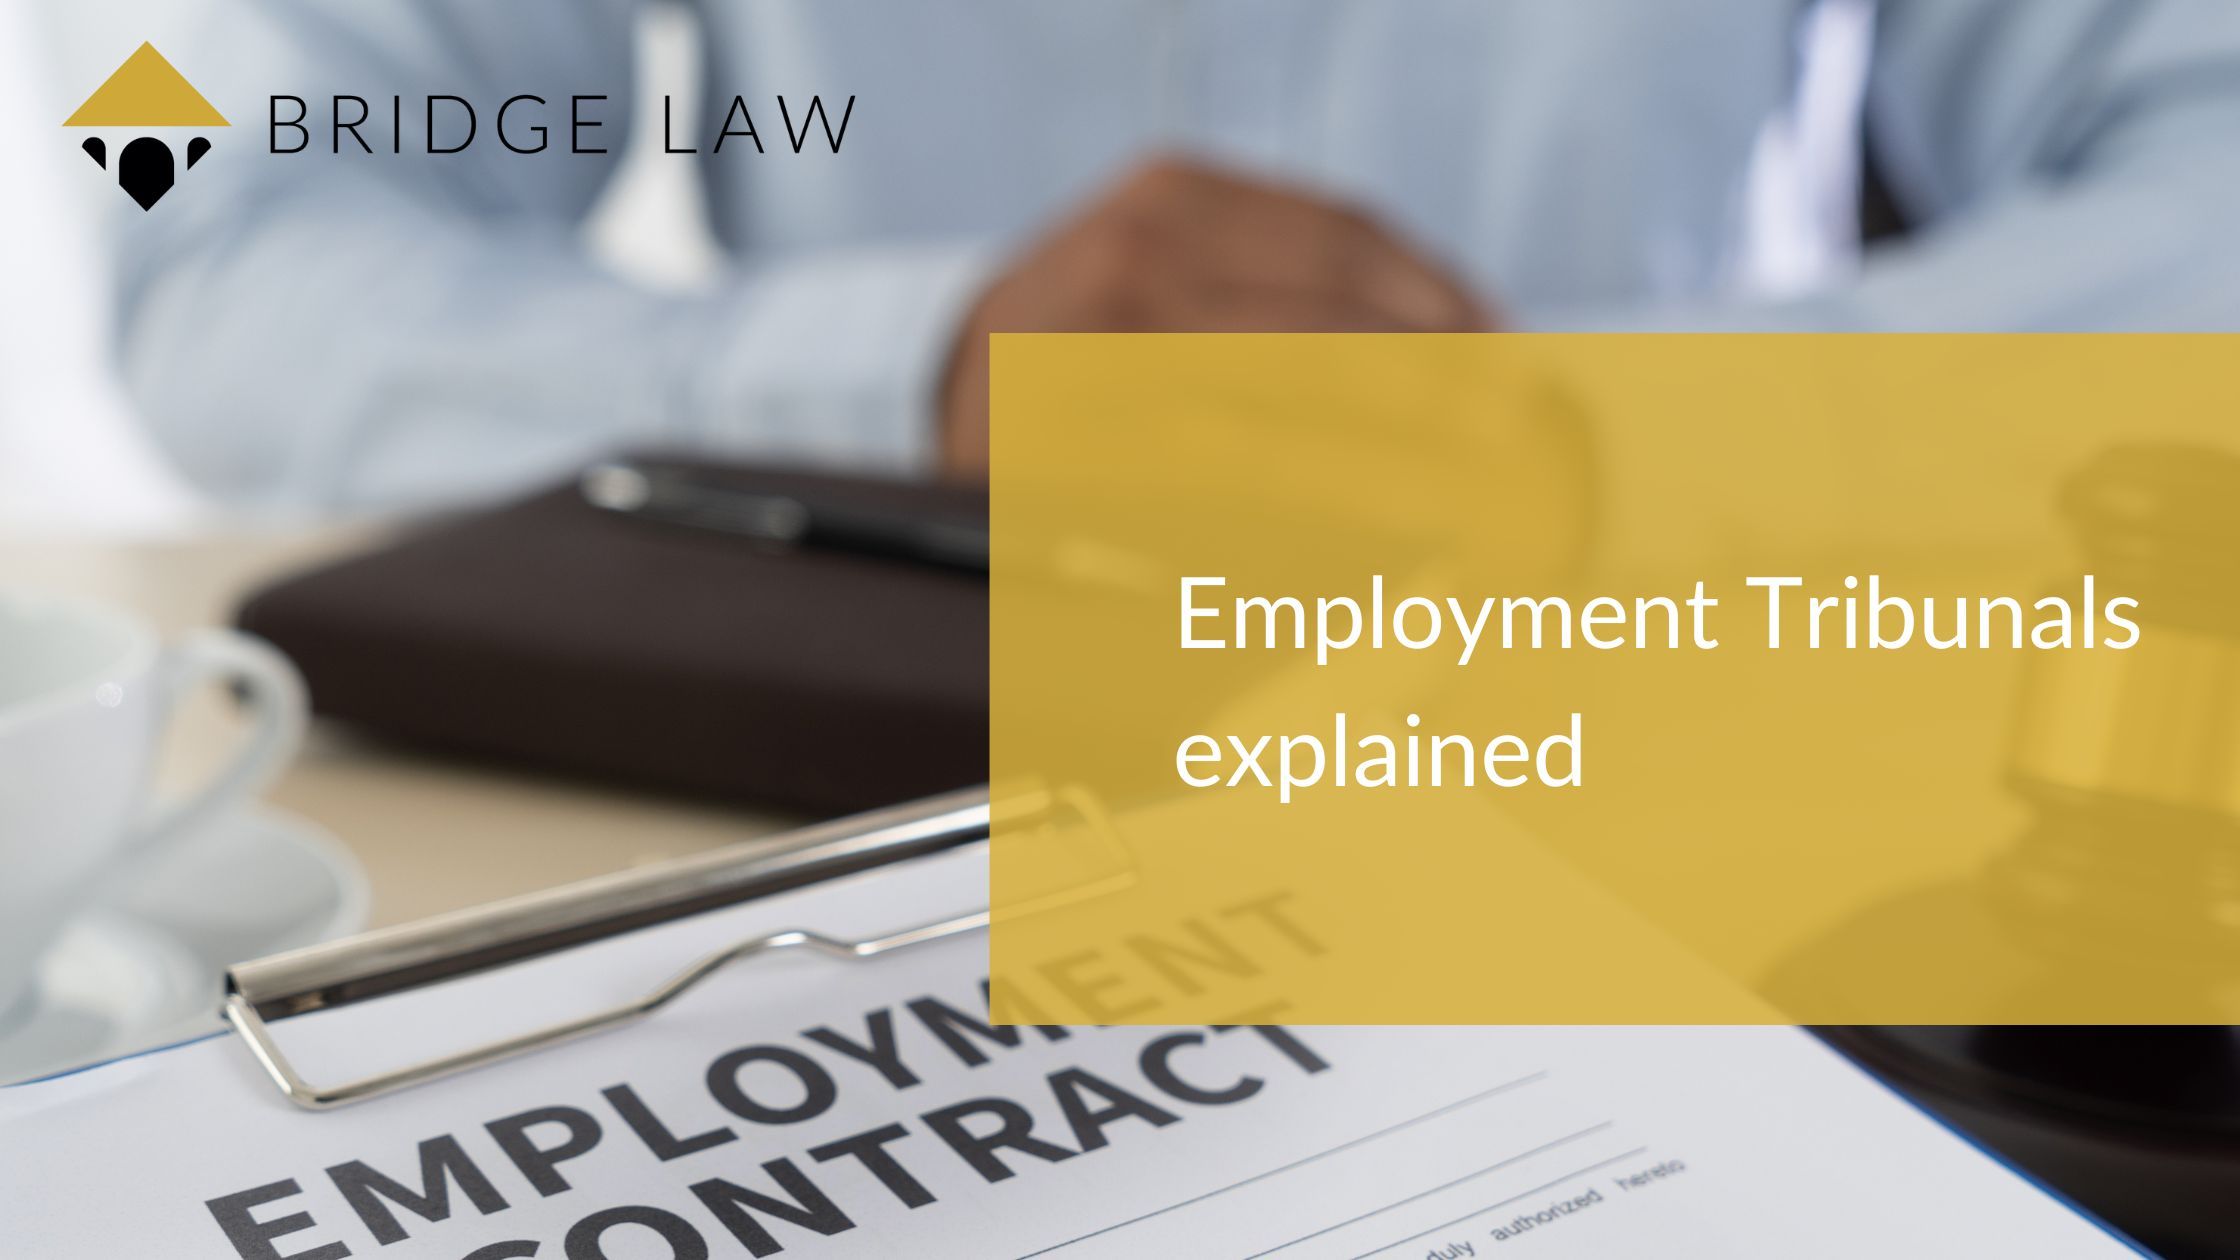 Photo of a man and an employment contract - bridge law blog header image with text "Employment Tribunals explained"